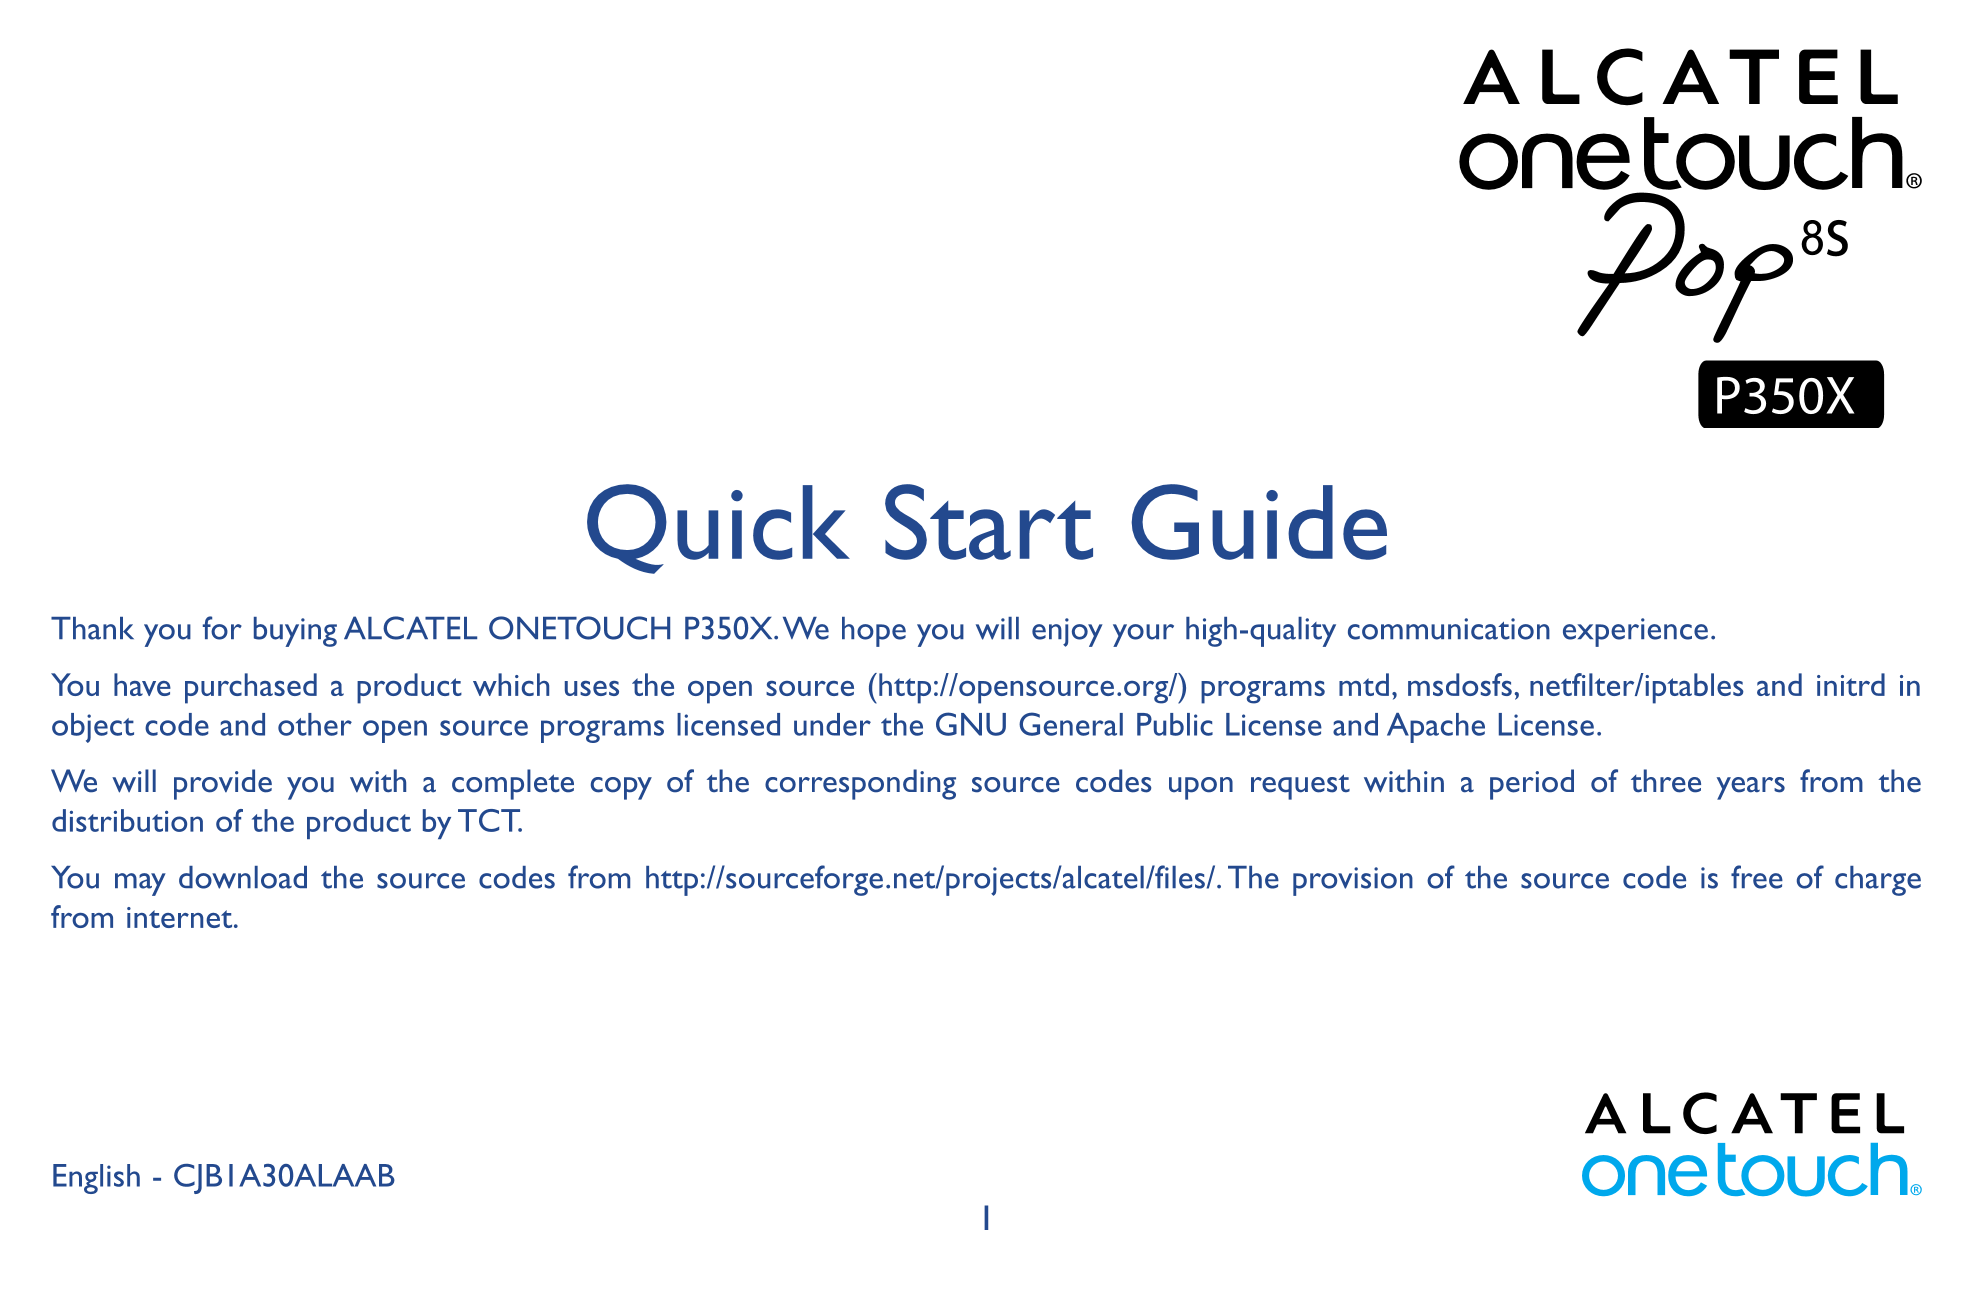 s
P350X
Quick Start Guide
Thank you for buying ALCATEL ONETOUCH P350X. We hope you will enjoy your high-quality communication ex